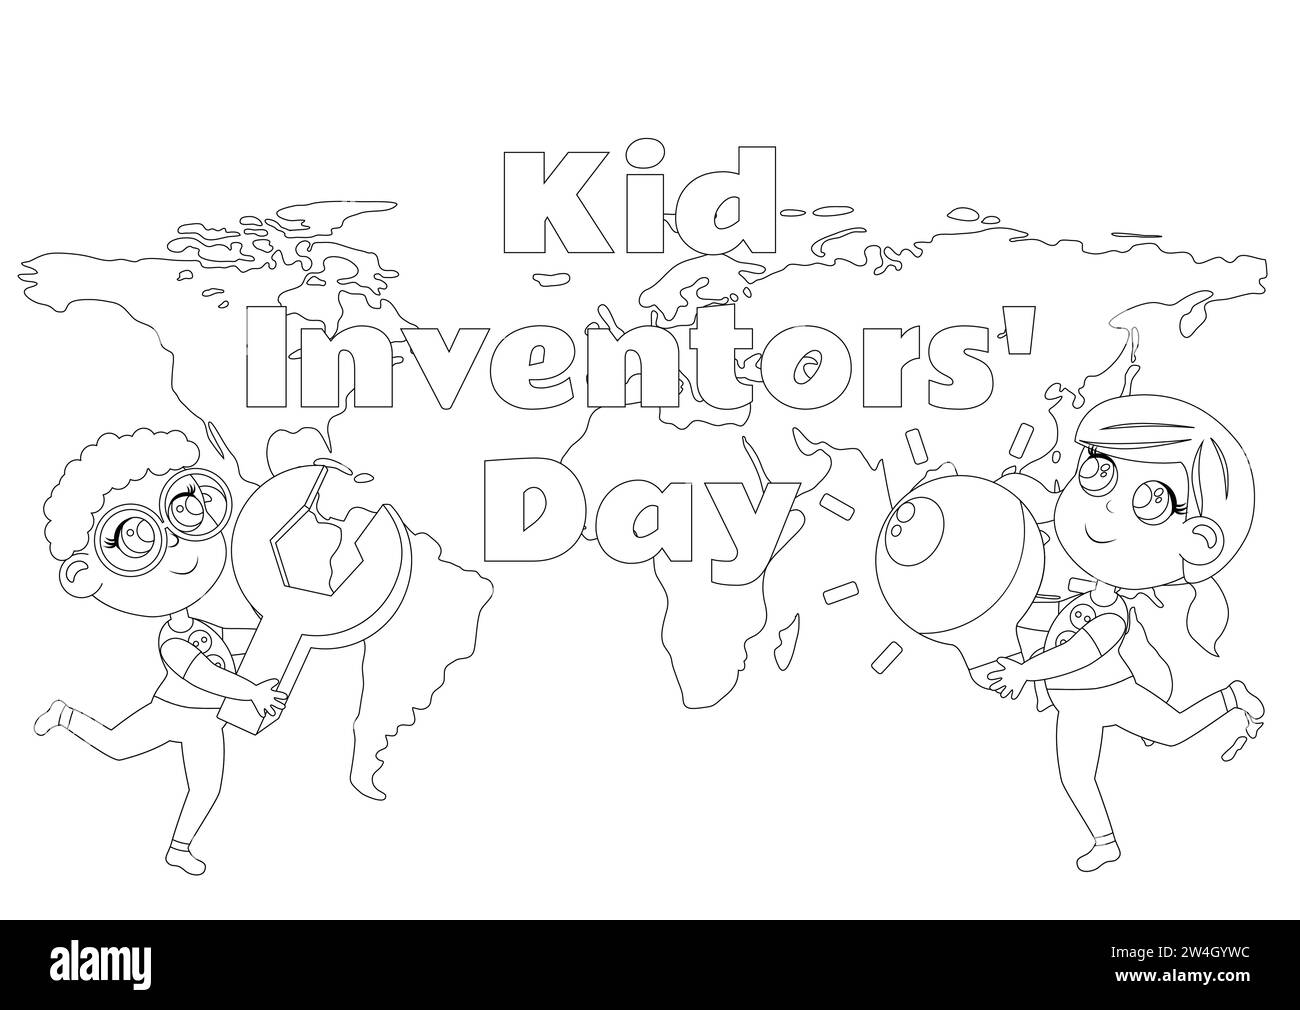 Coloring page. Kid Inventors Day. Cute boy and girl with light bulb and wrench and text Children's Invention Day. Сartoon childish style. Stock Vector